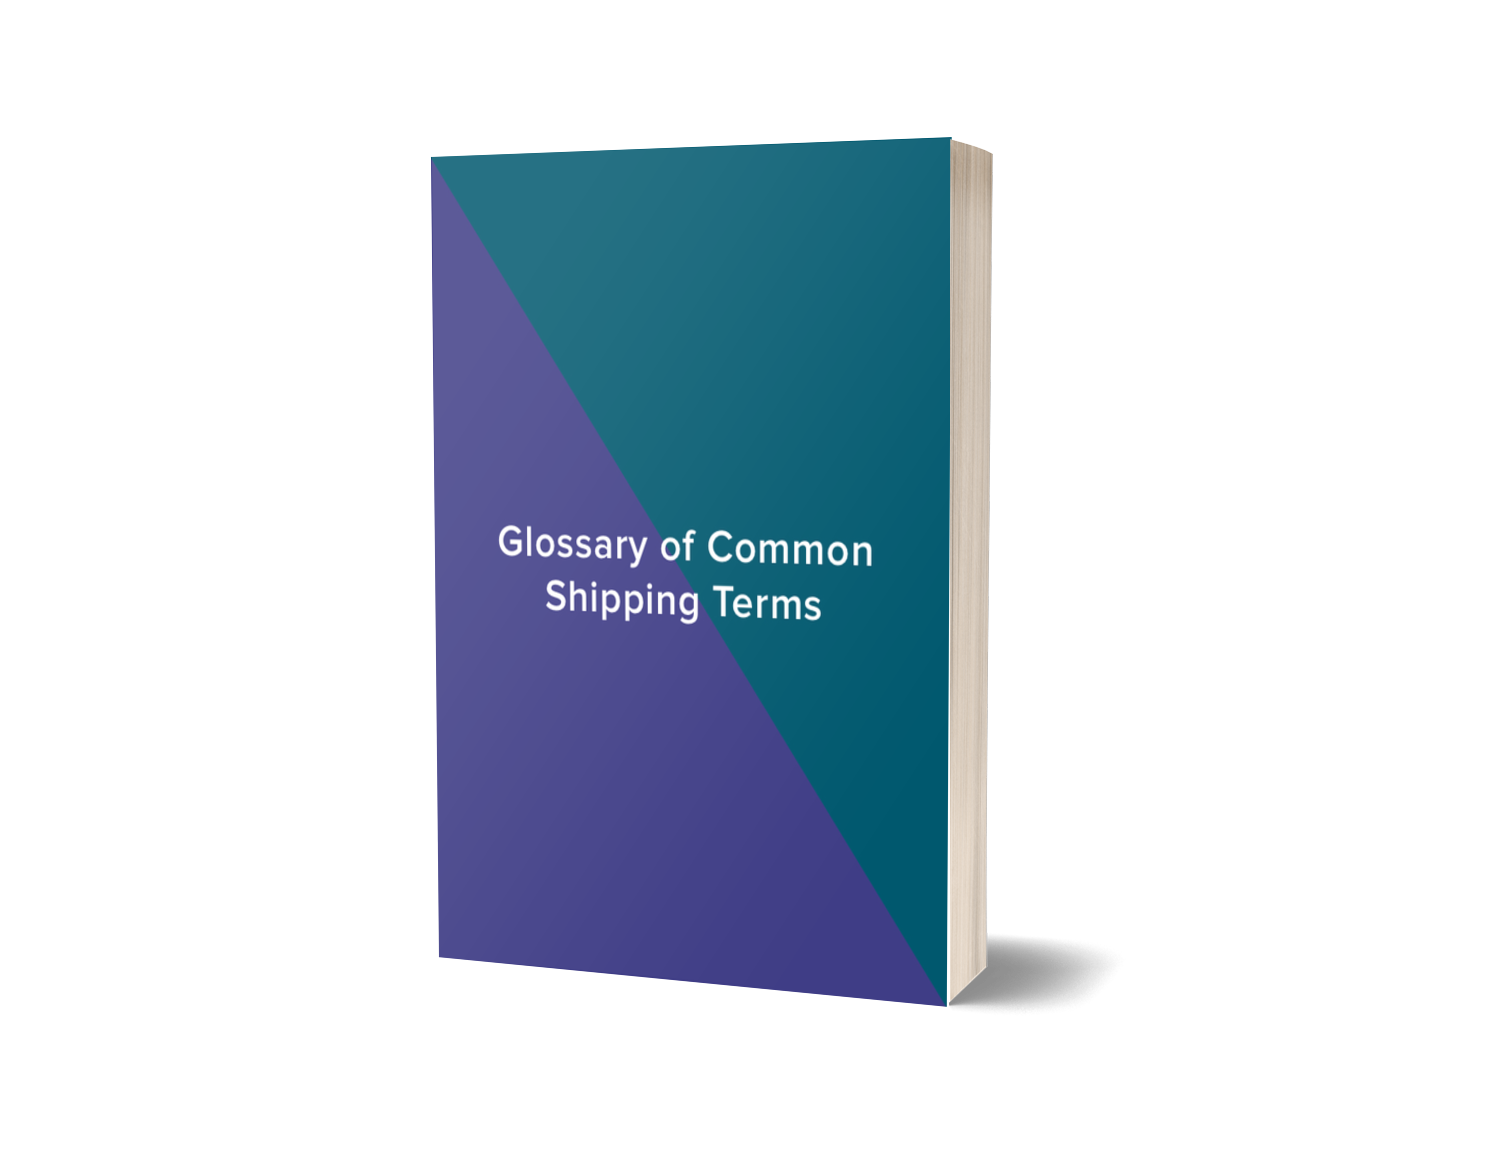 ebook-glossary.png